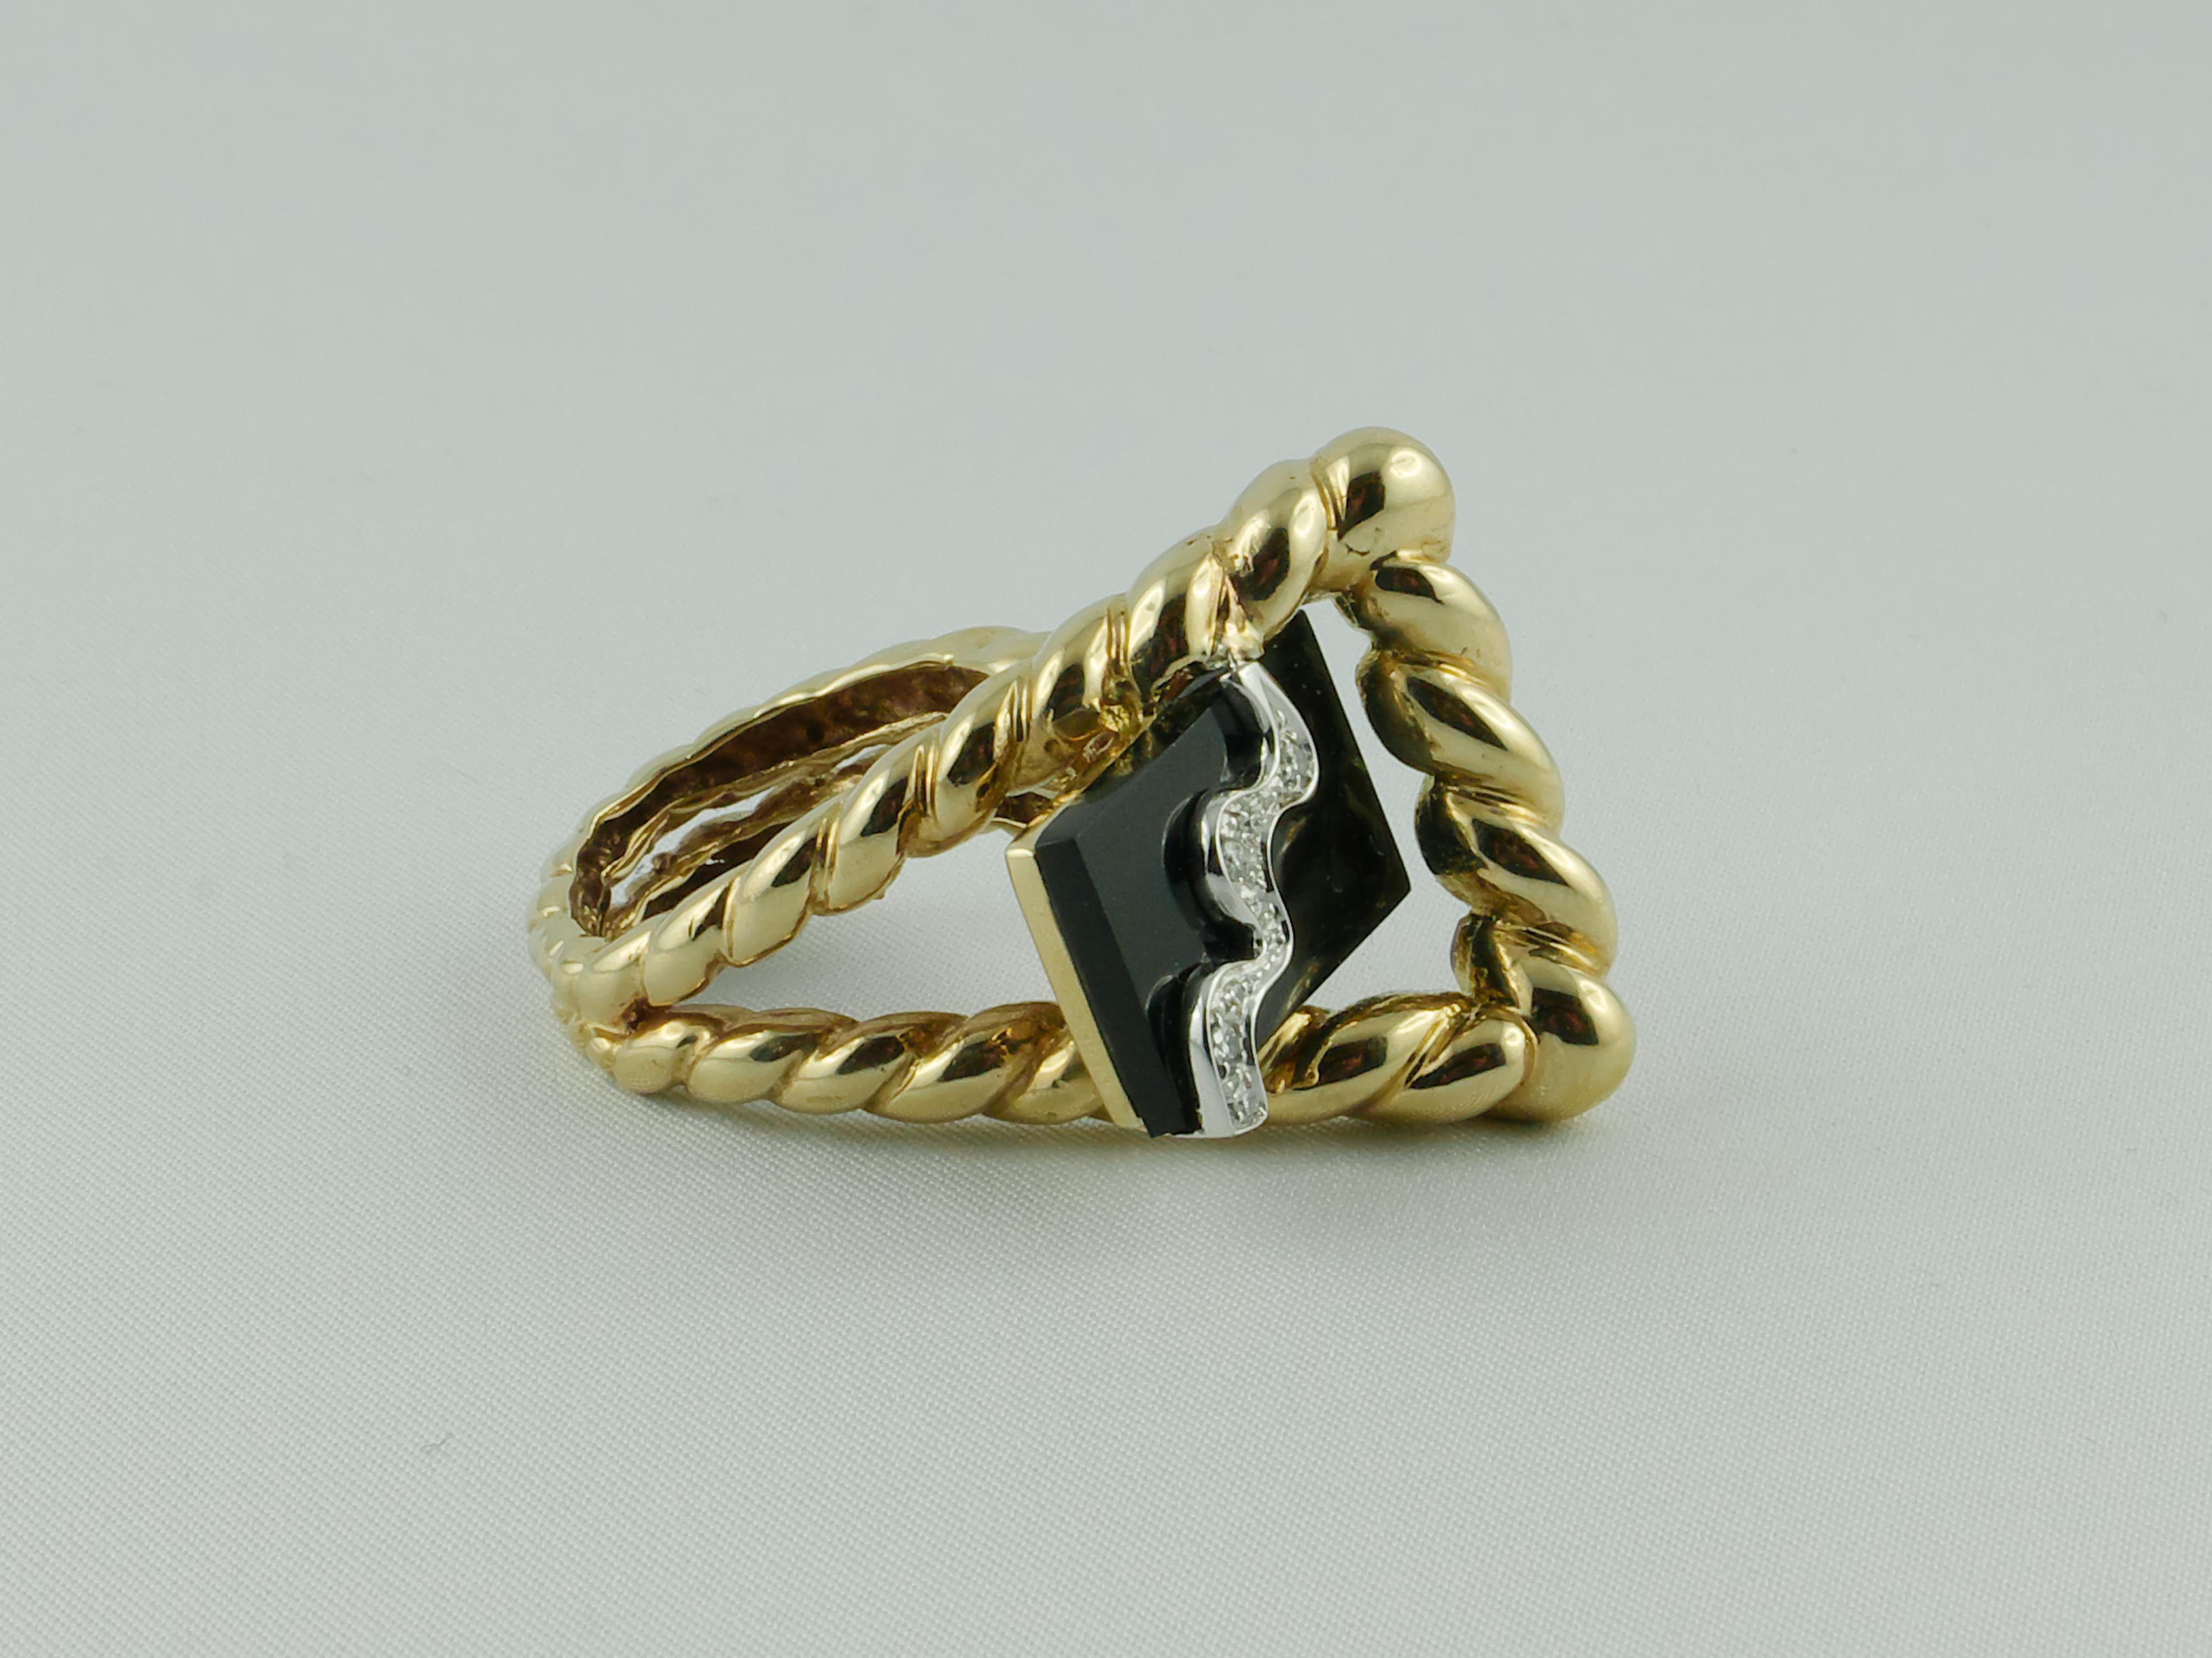 Attractive, unconventional and asymmetrical 1970s La Triomphe Onyx Gold and Diamond ring.     A Diamond wave motif adorns and enlights the top running through the Onyx element.  The shank has a slightly graduating fluted swirl design. The Onyx 